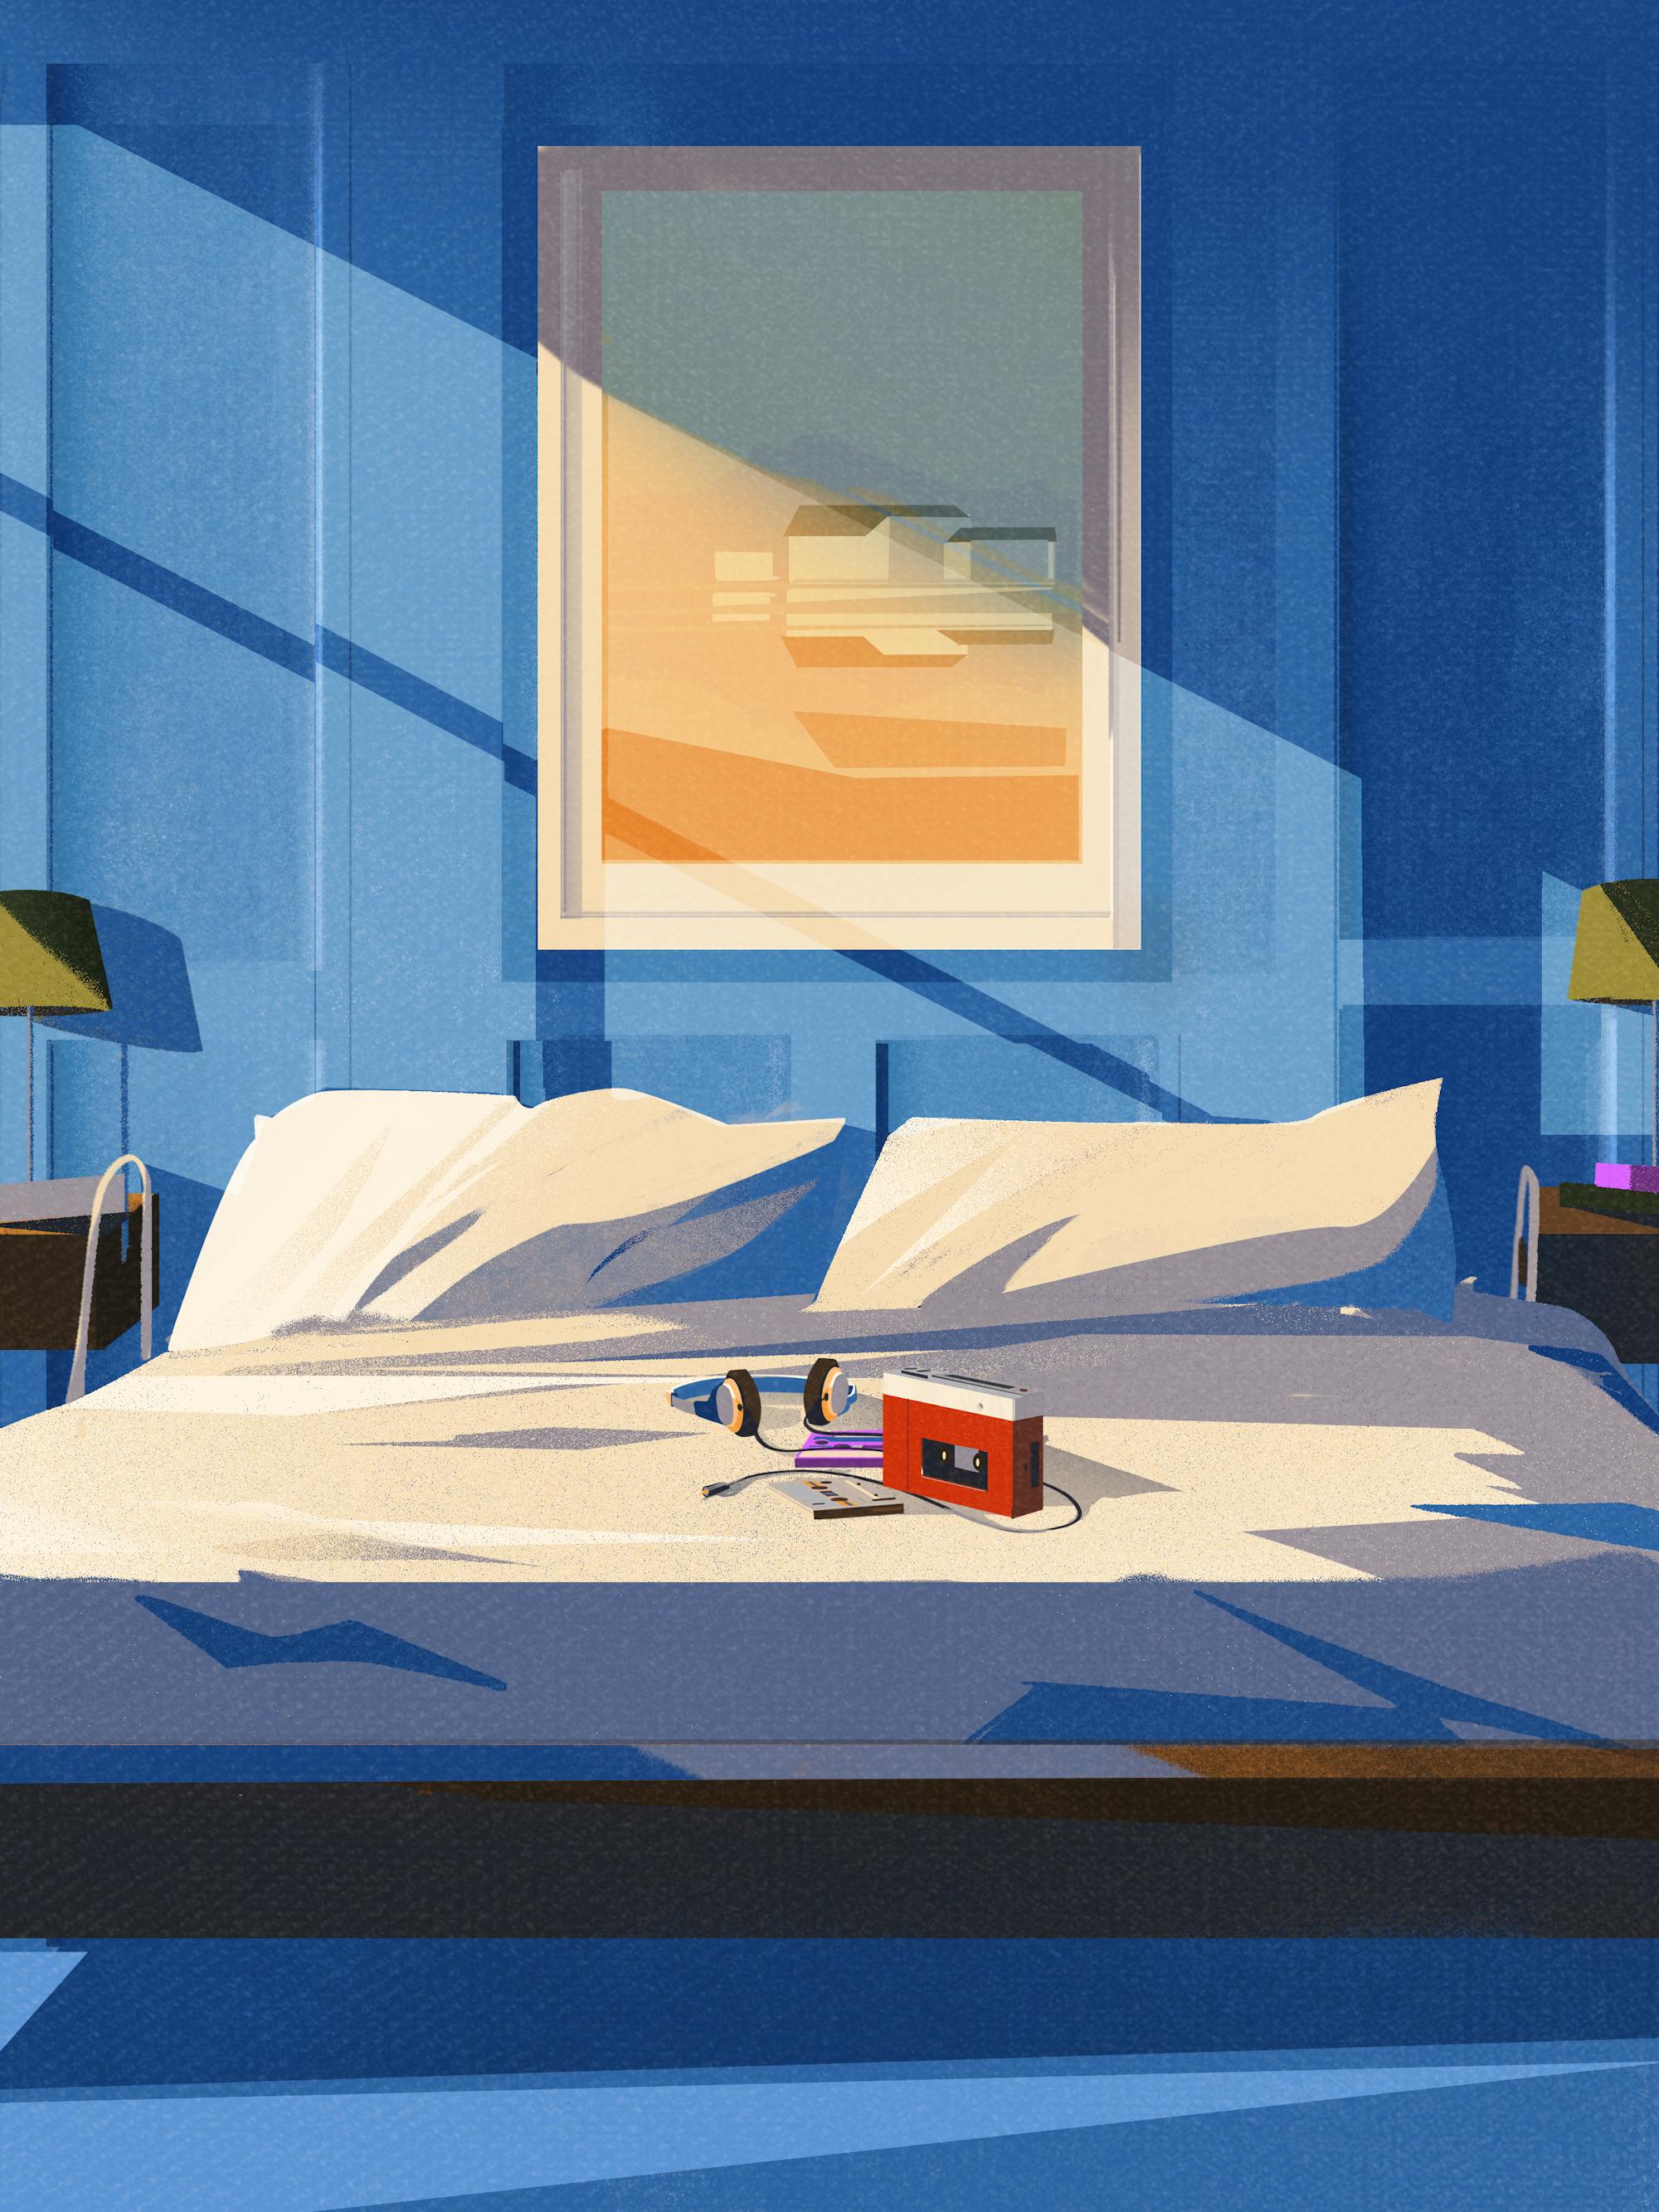 An illustration of a cassette-player with headphones and a couple tapes sitting on a white bed in a blue room.